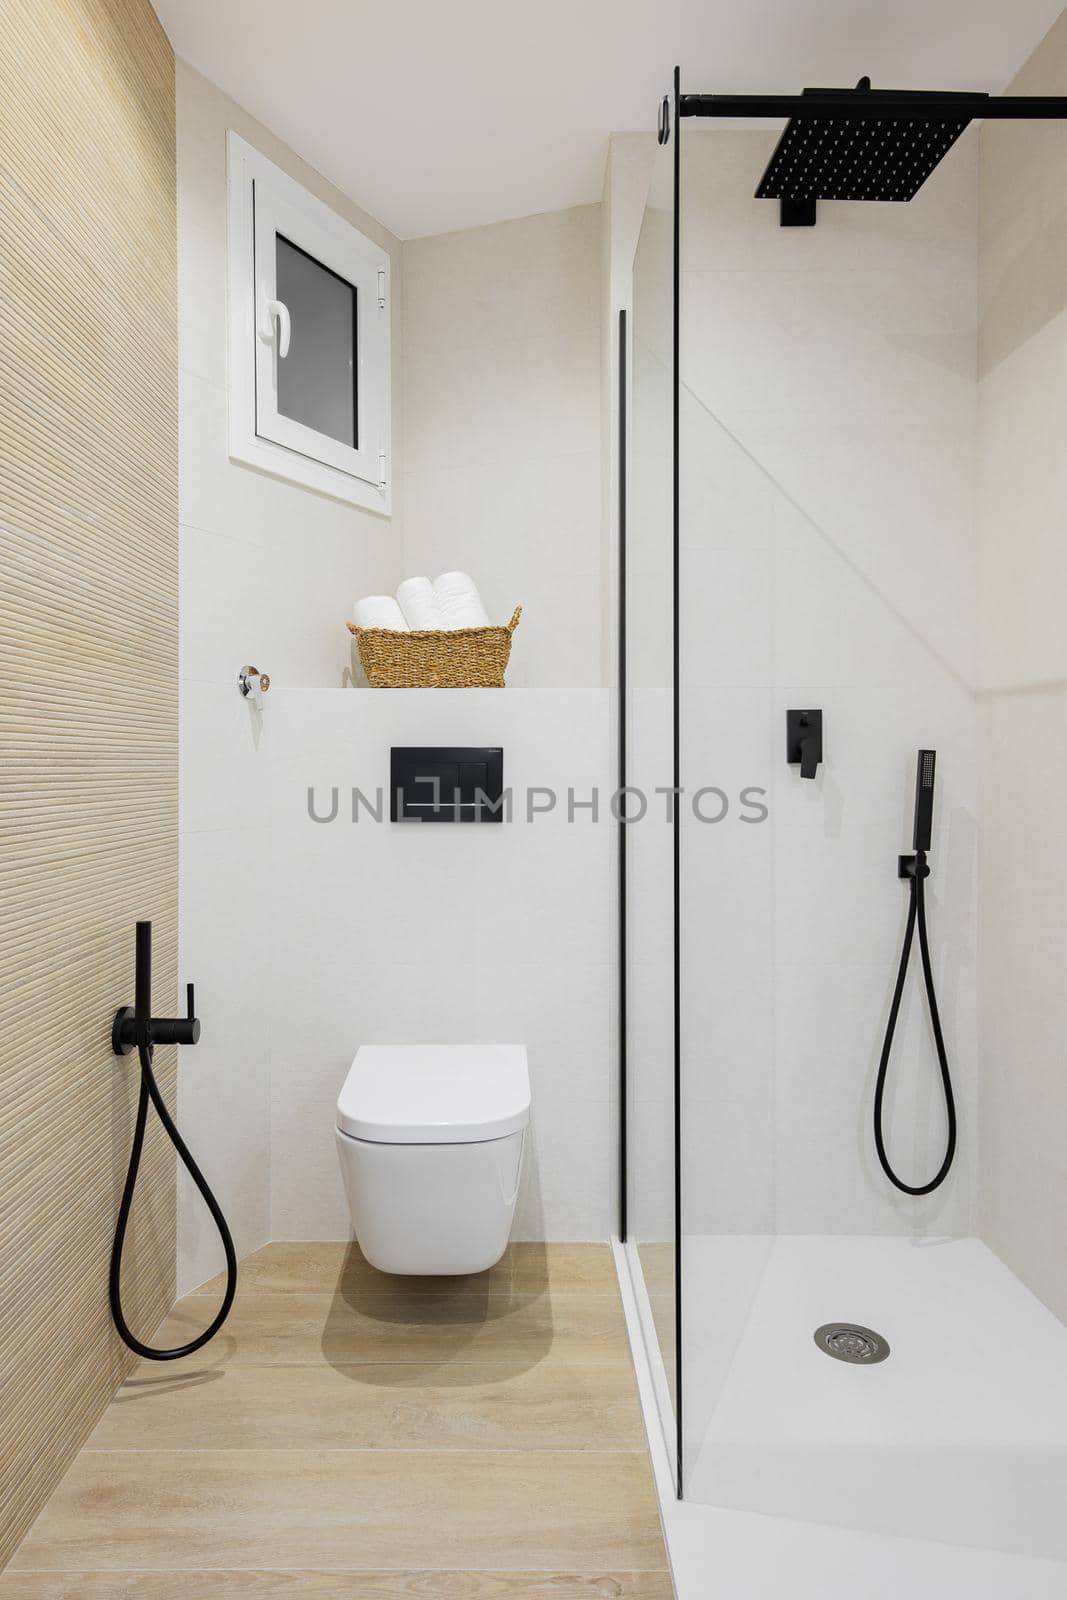 Interior of modern style bathroom in white and beige colors in refurbished apartment. Shower zone and toilet, with black faucets, towels and tiled floor and walls